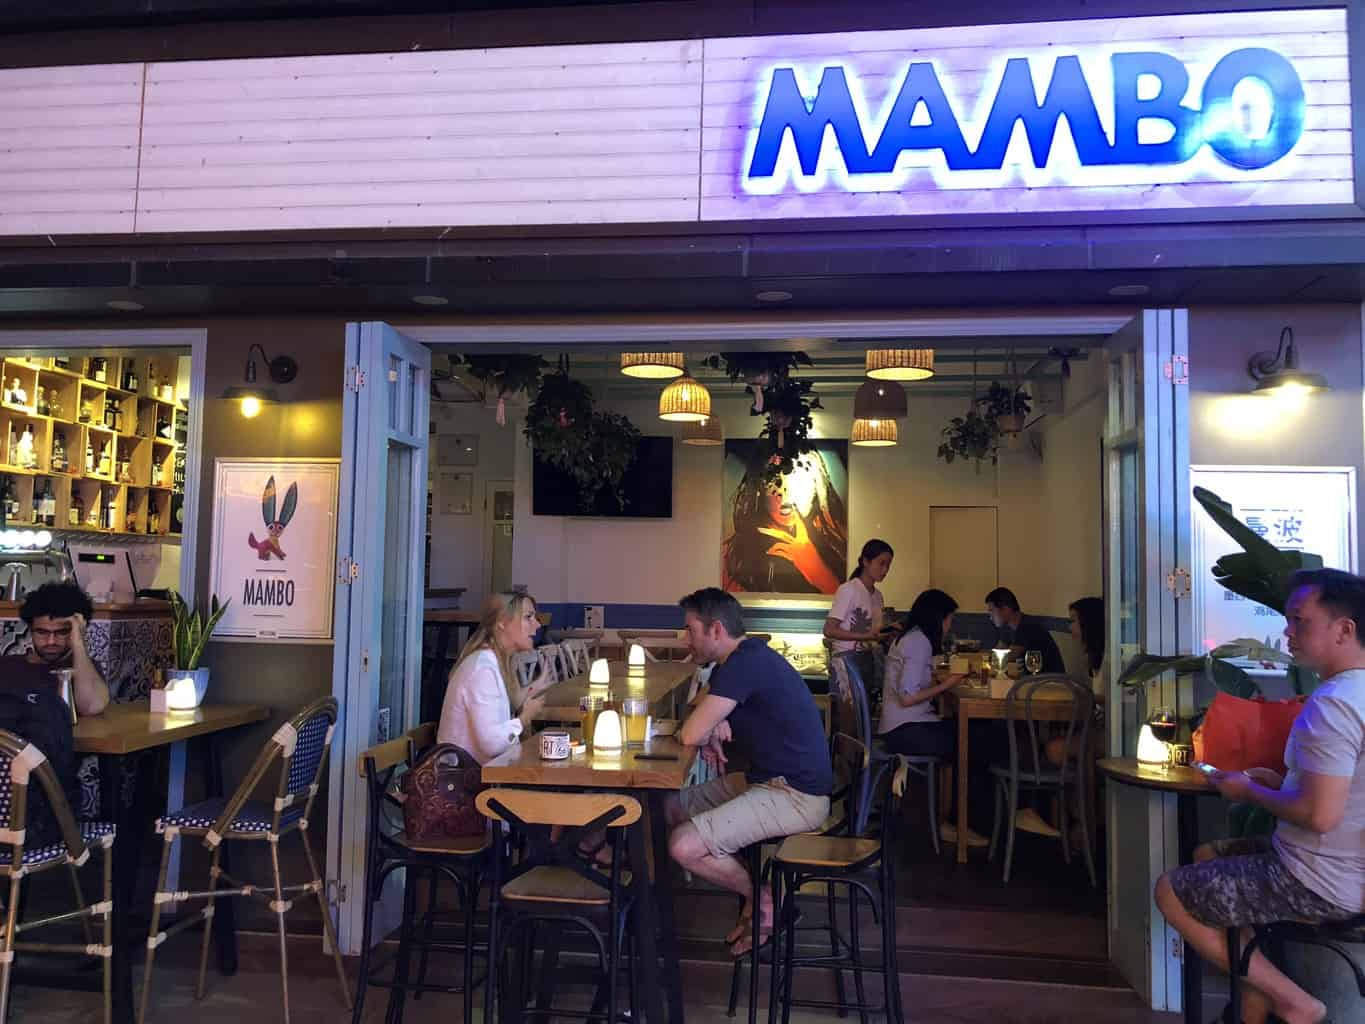 Featured image for “Congrats to Mambo on their 1 year anniversary serving Mexican food”